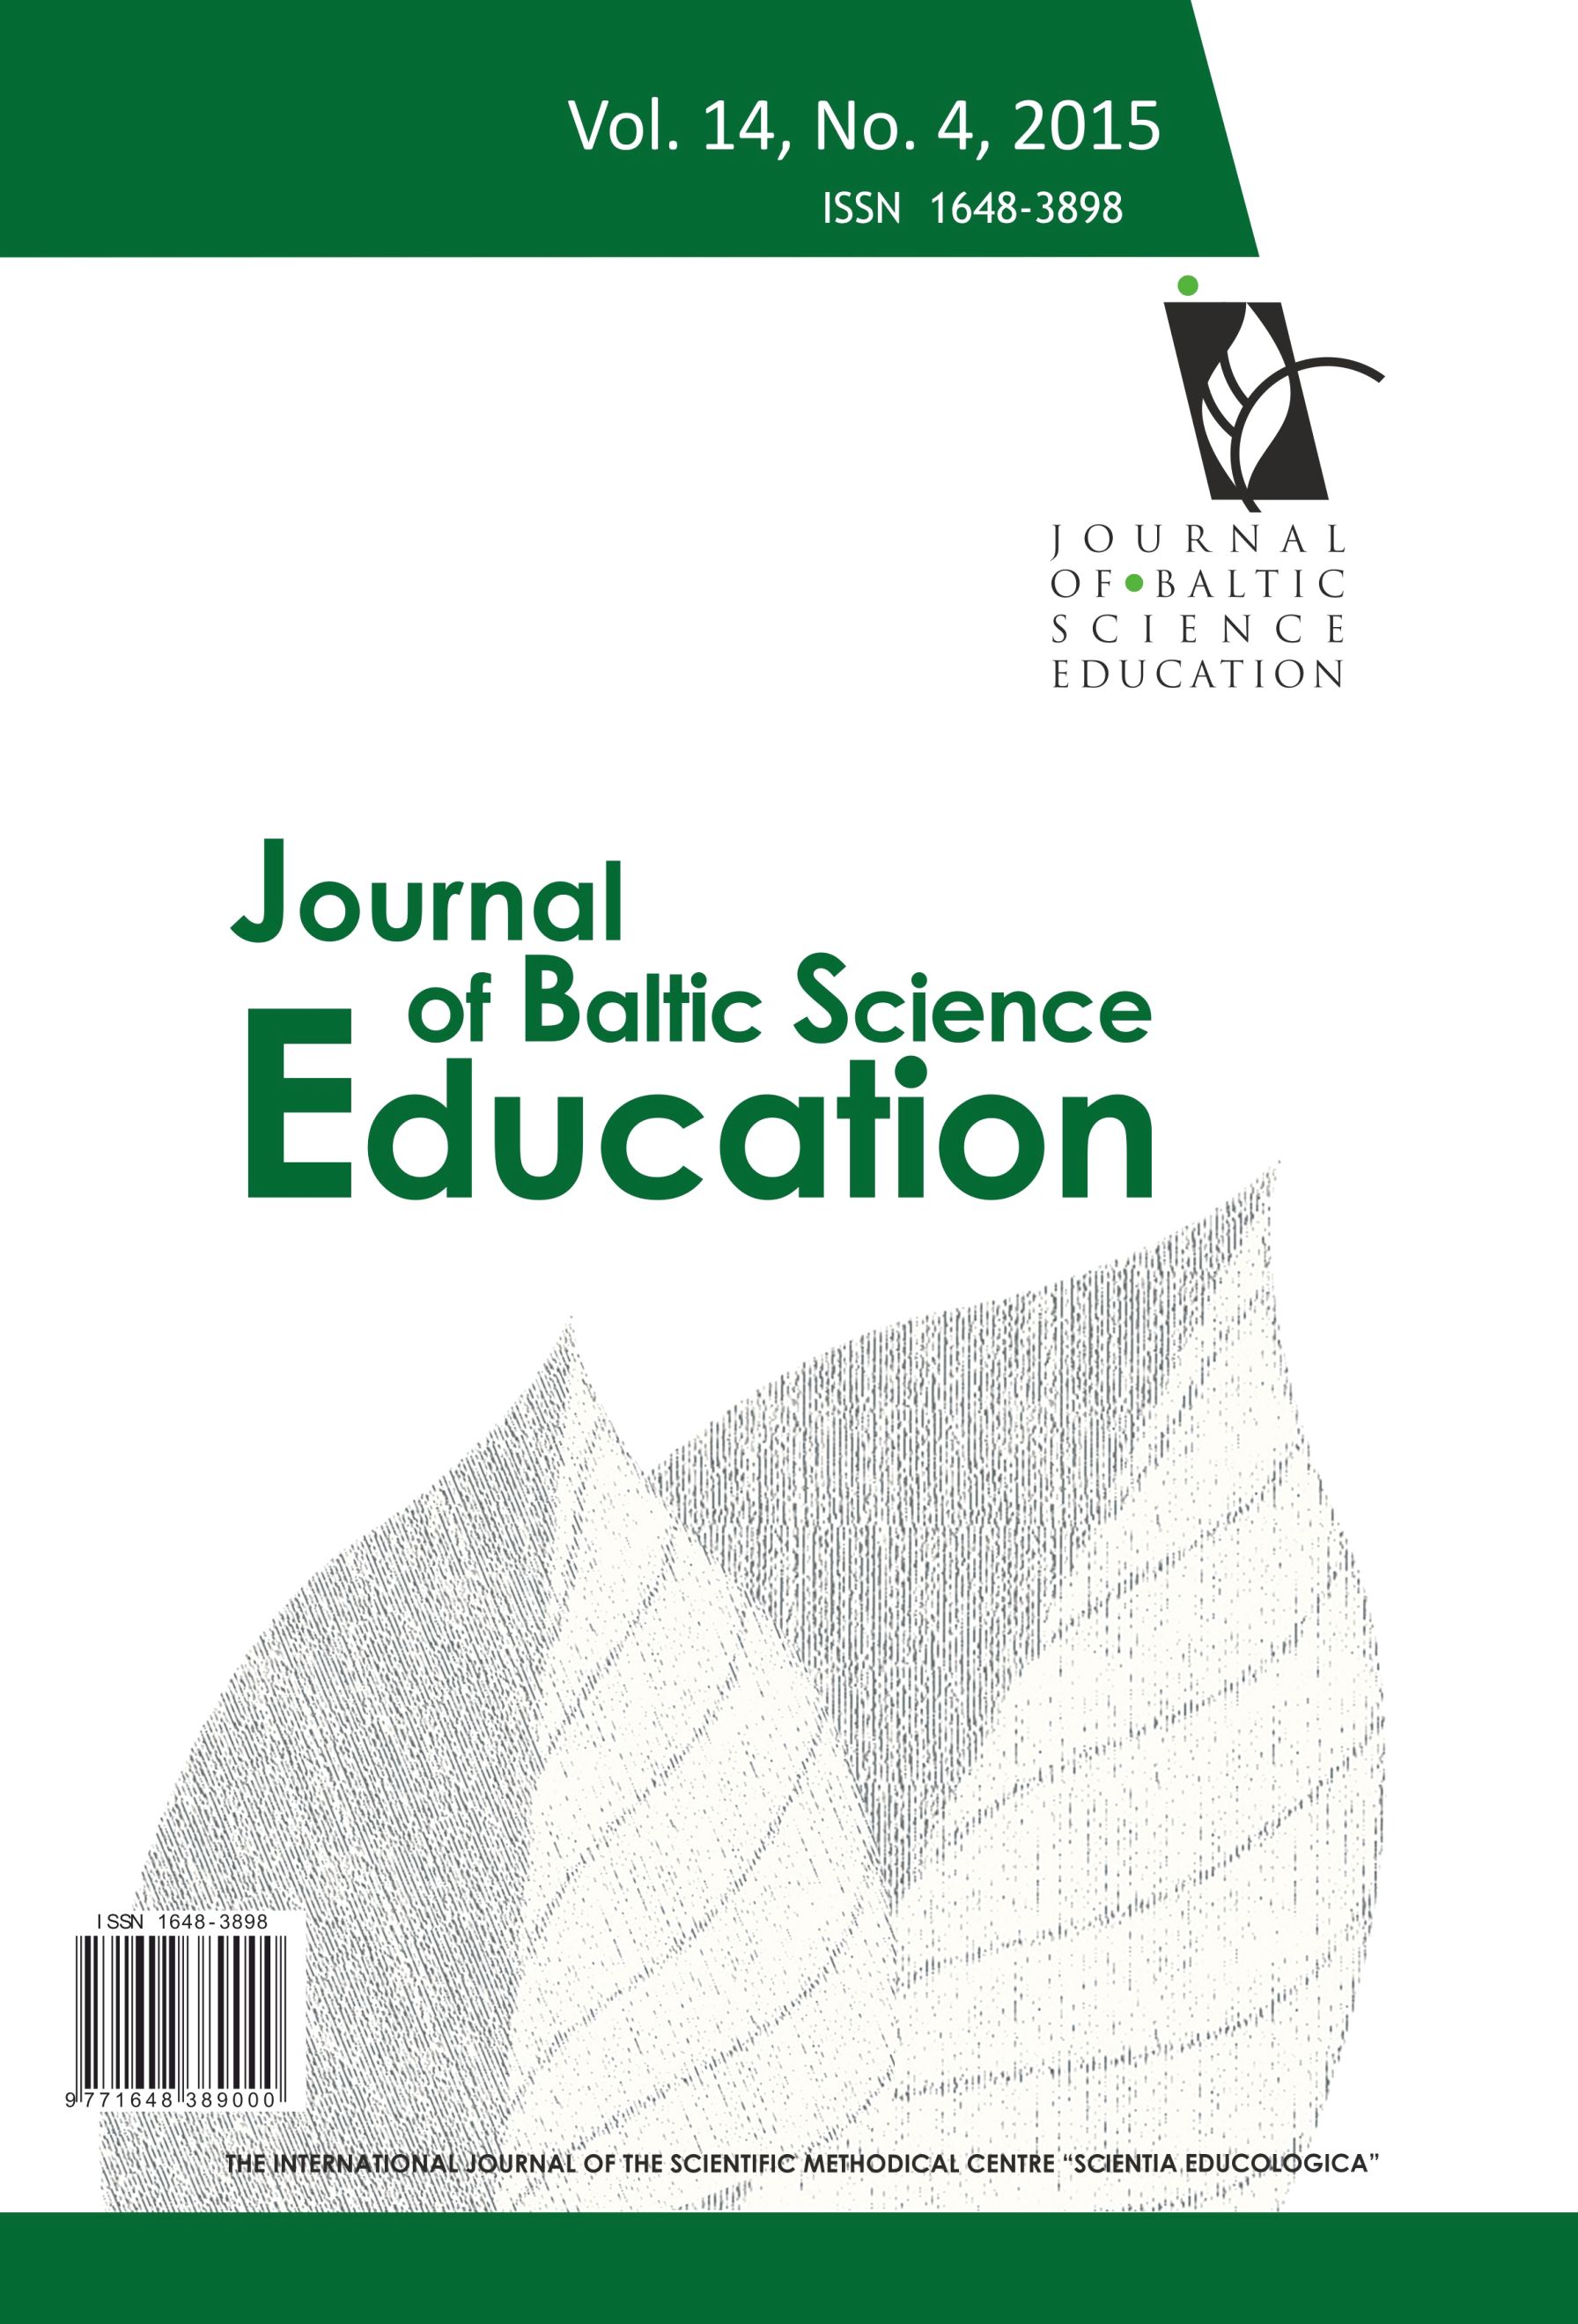 ANALYSIS AND INTERVENTION OF STUDENT KNOWLEDGE OF NUTRITION AND SEXUALITY AT A PENAL INSTITUTION